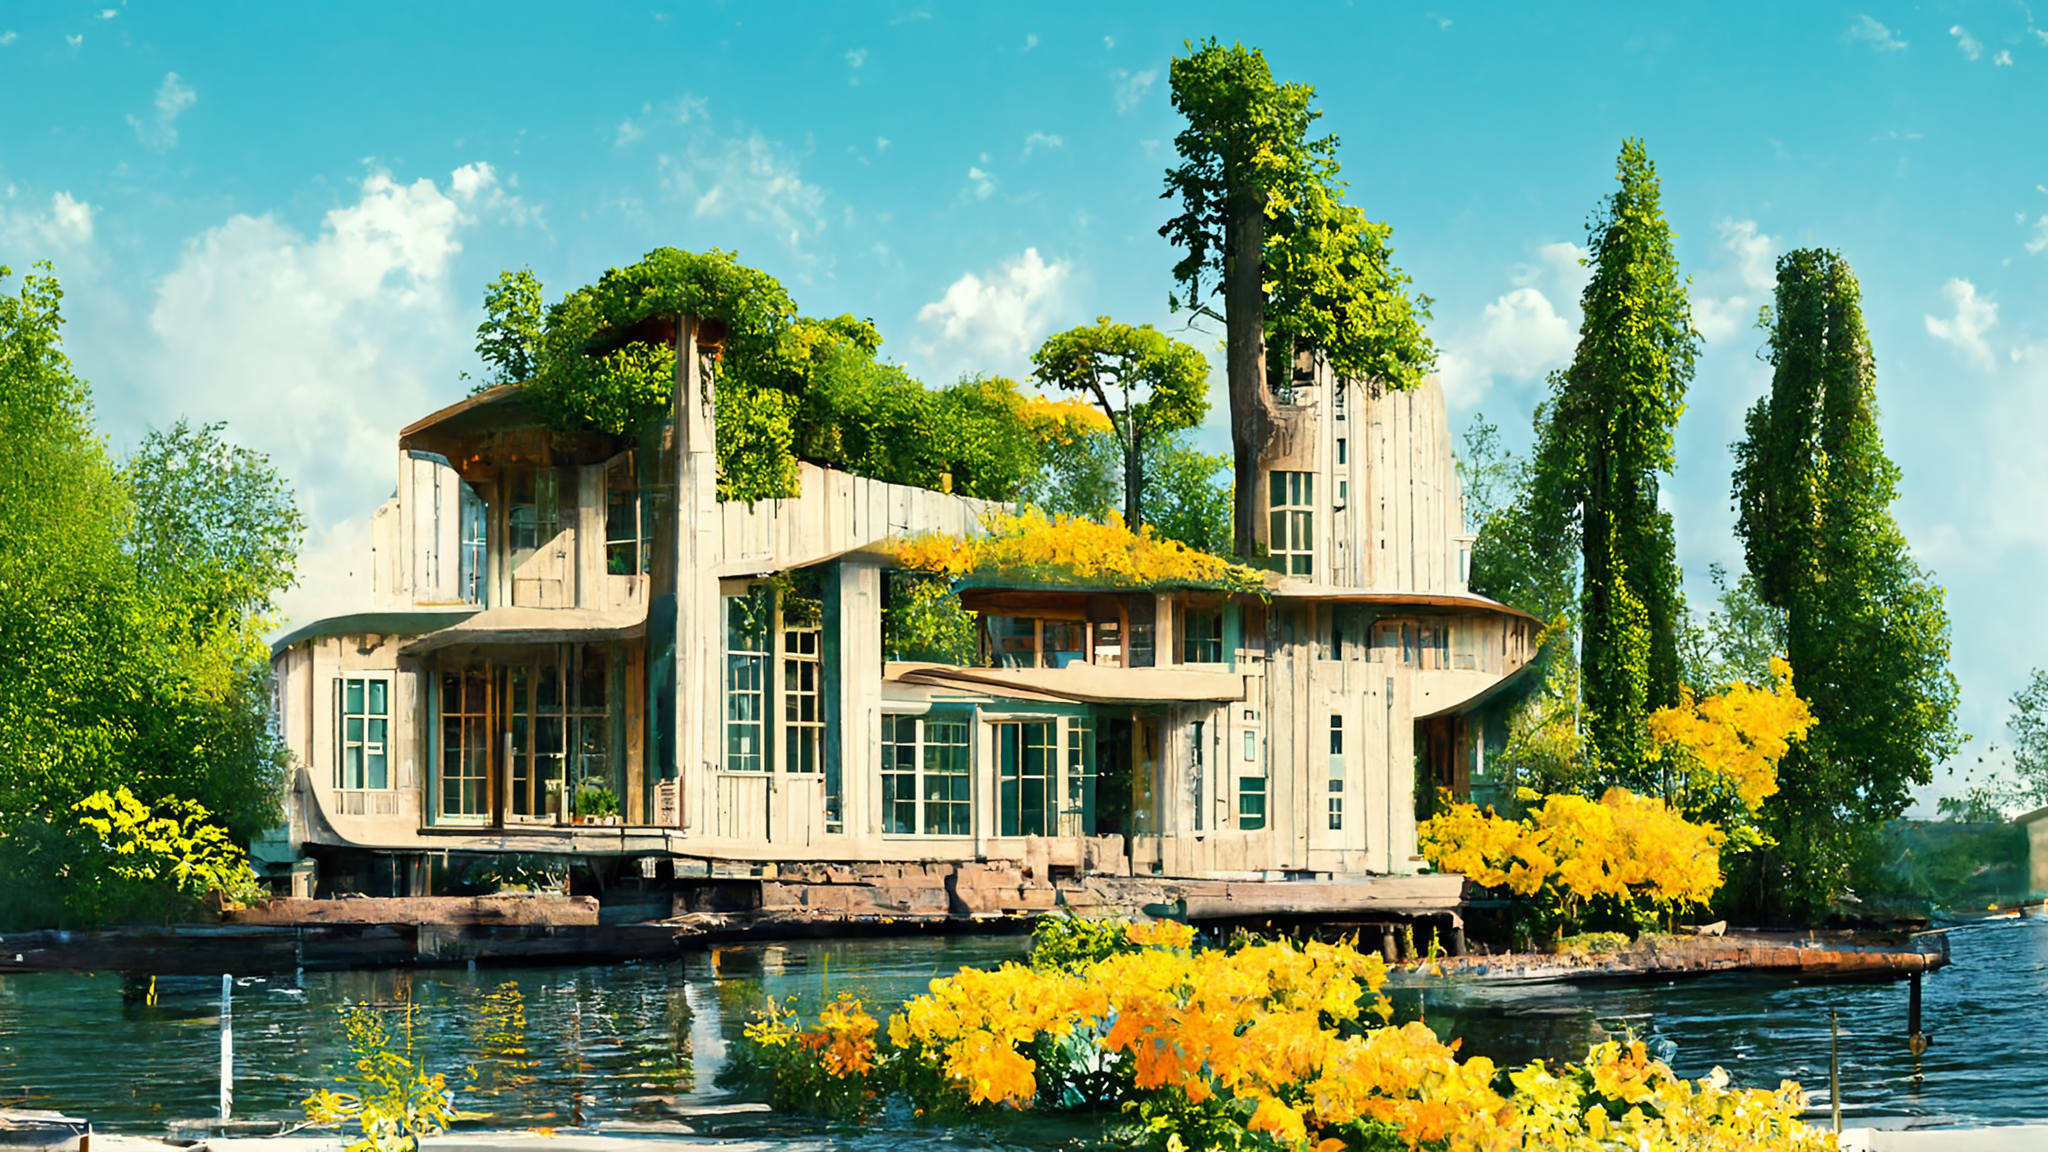 General 2048x1152 landscape forest flowers trees sea lake window house cottage bushes CGI water AI art